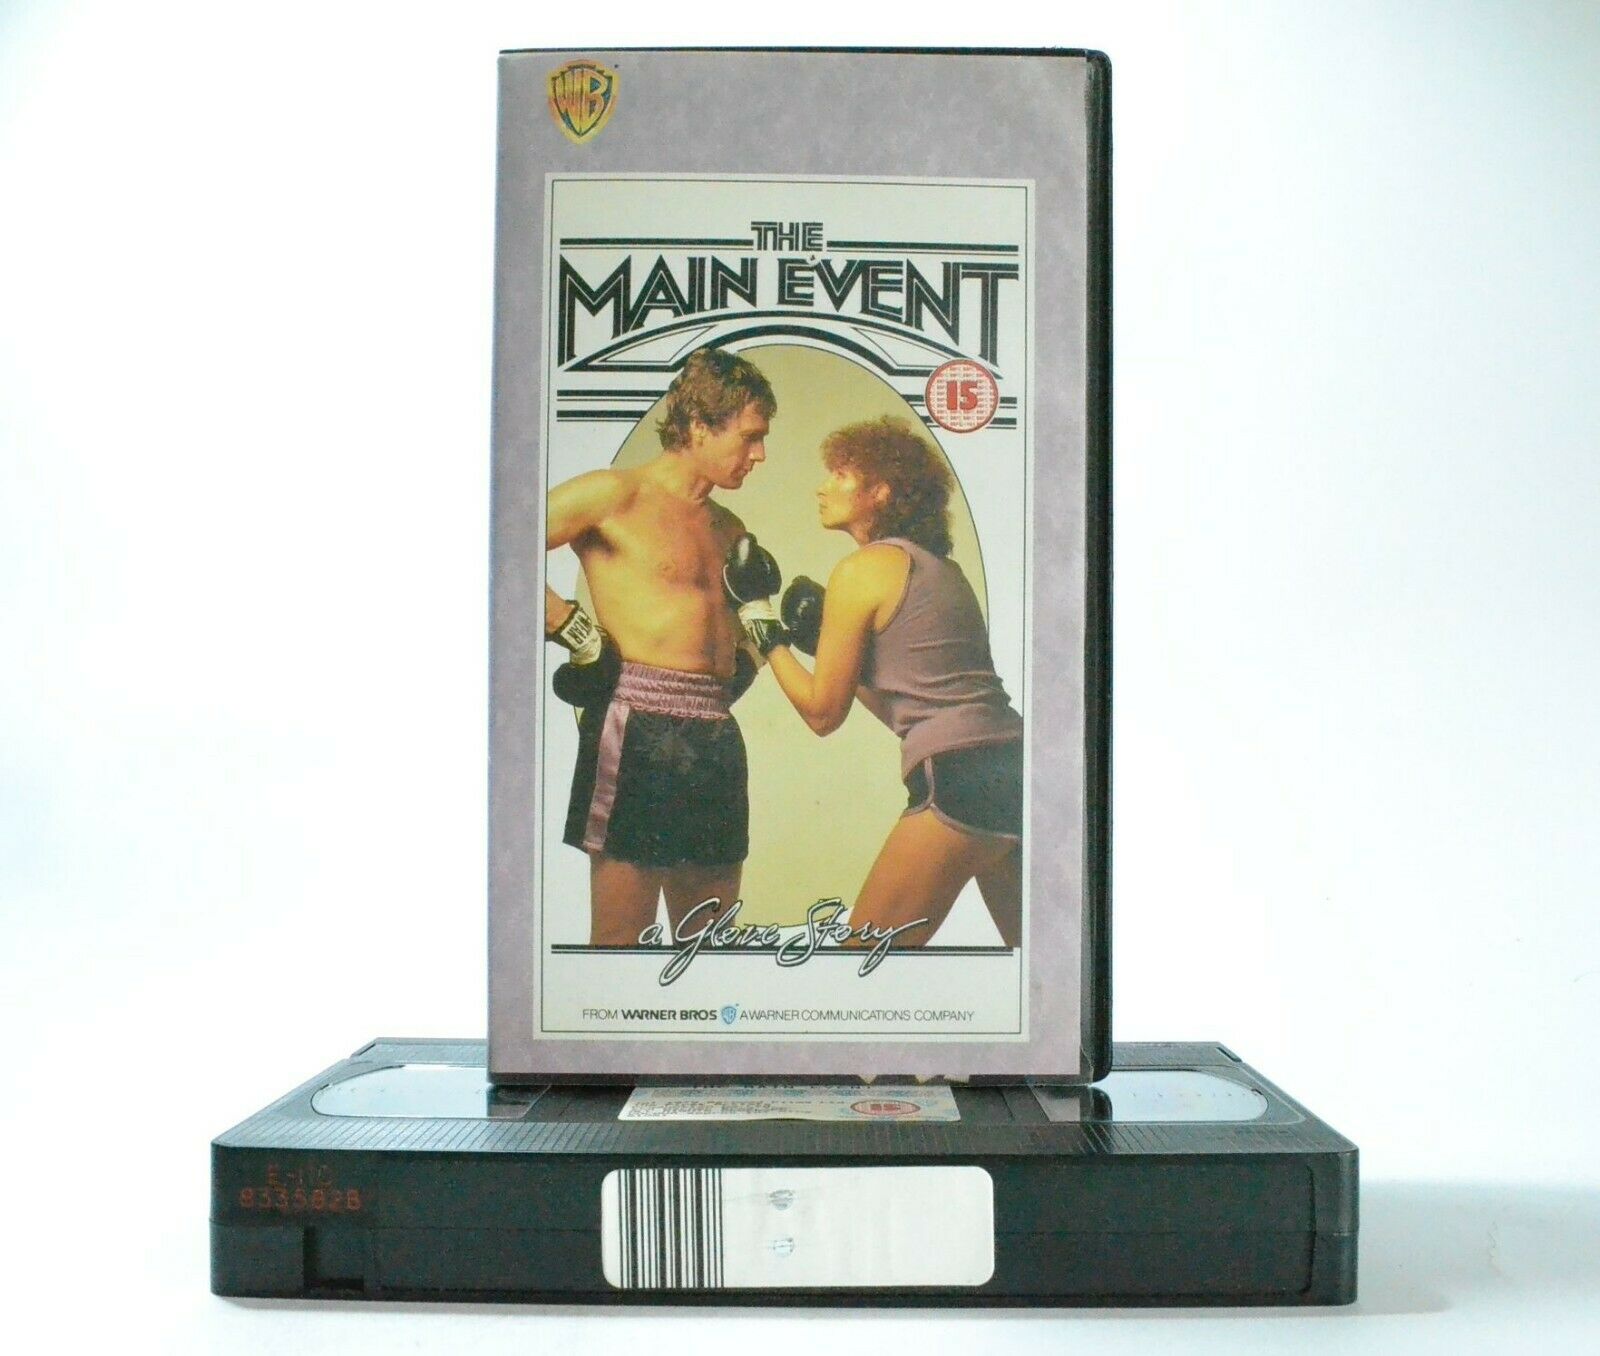 The Main Event: A Glove Story - Romantic Comedy (1979) - B.Streisand - Pal VHS-